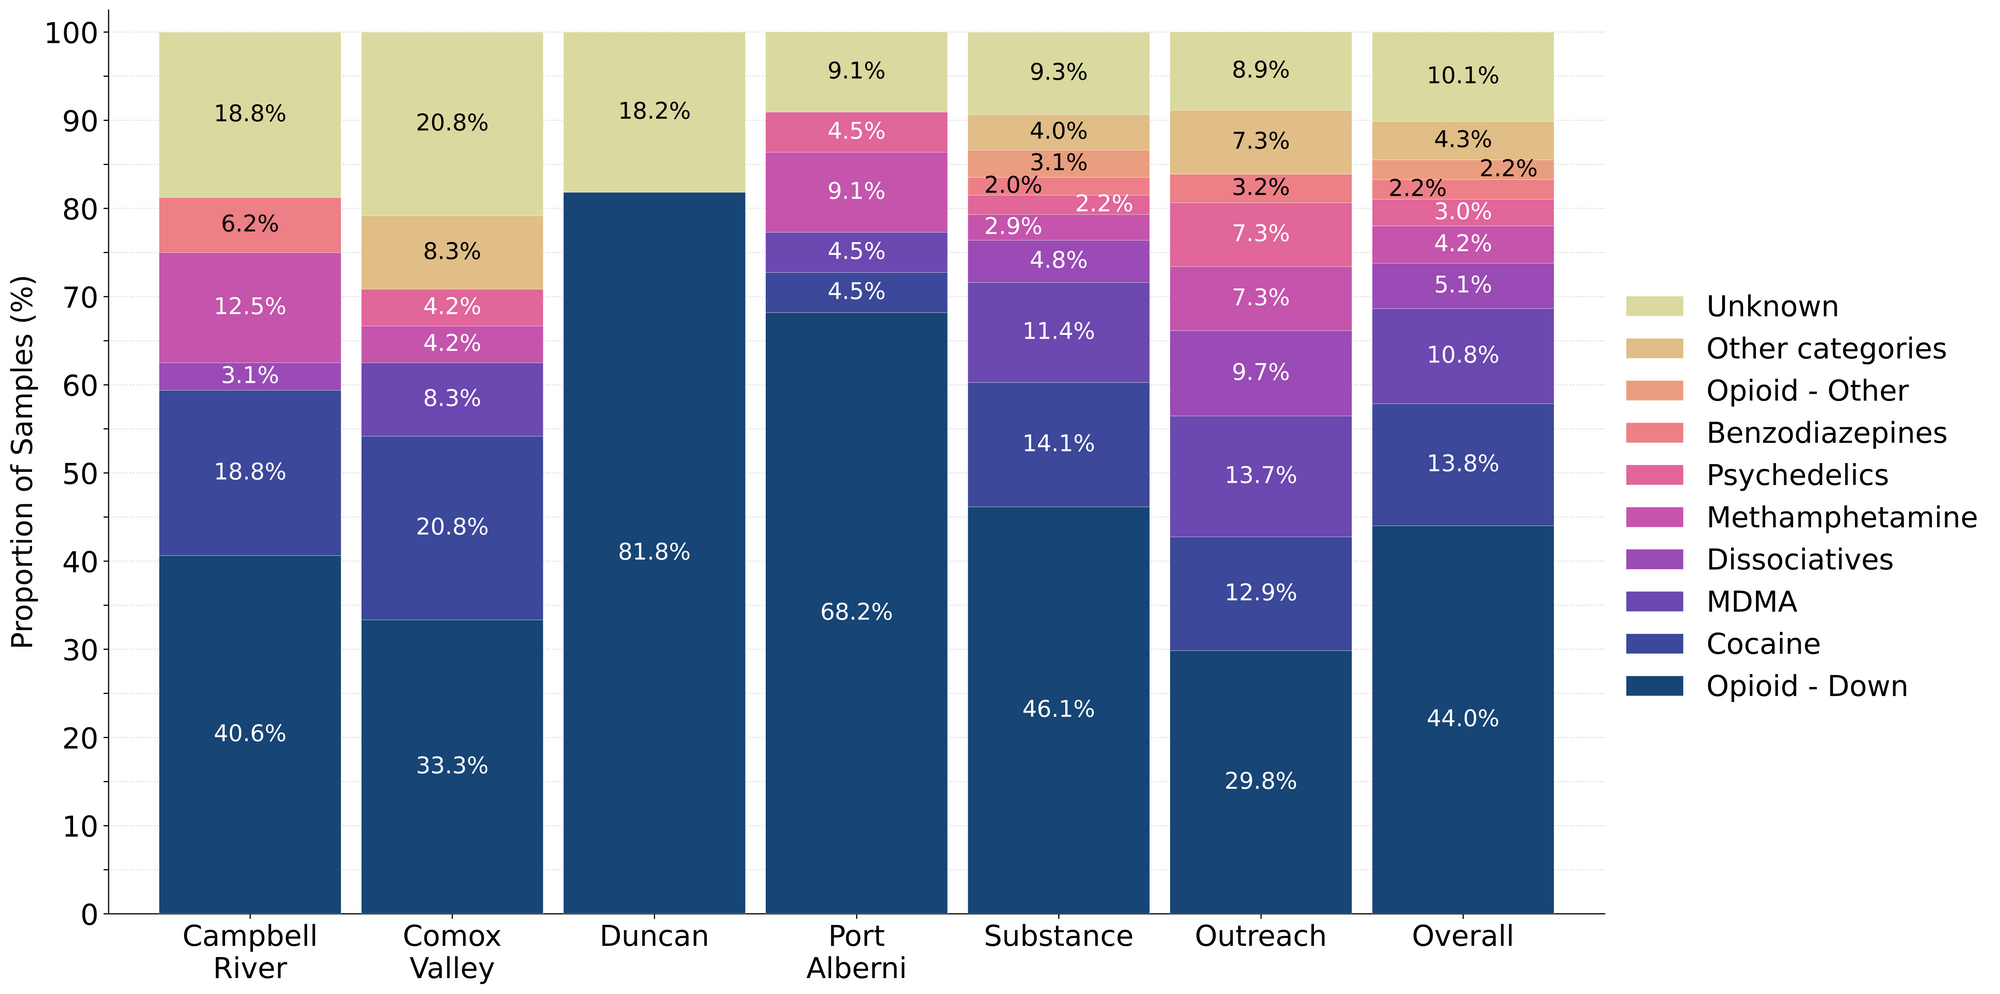 Figure 1. Prevalence of drug classes checked during December split by sample collection/method. Bars are stacked by the percentage of samples in each drug class, with the individual percentages overlaid. Drug classes which represent less than 1% of a given location’s total do not have their percent overlaid onto the bar.